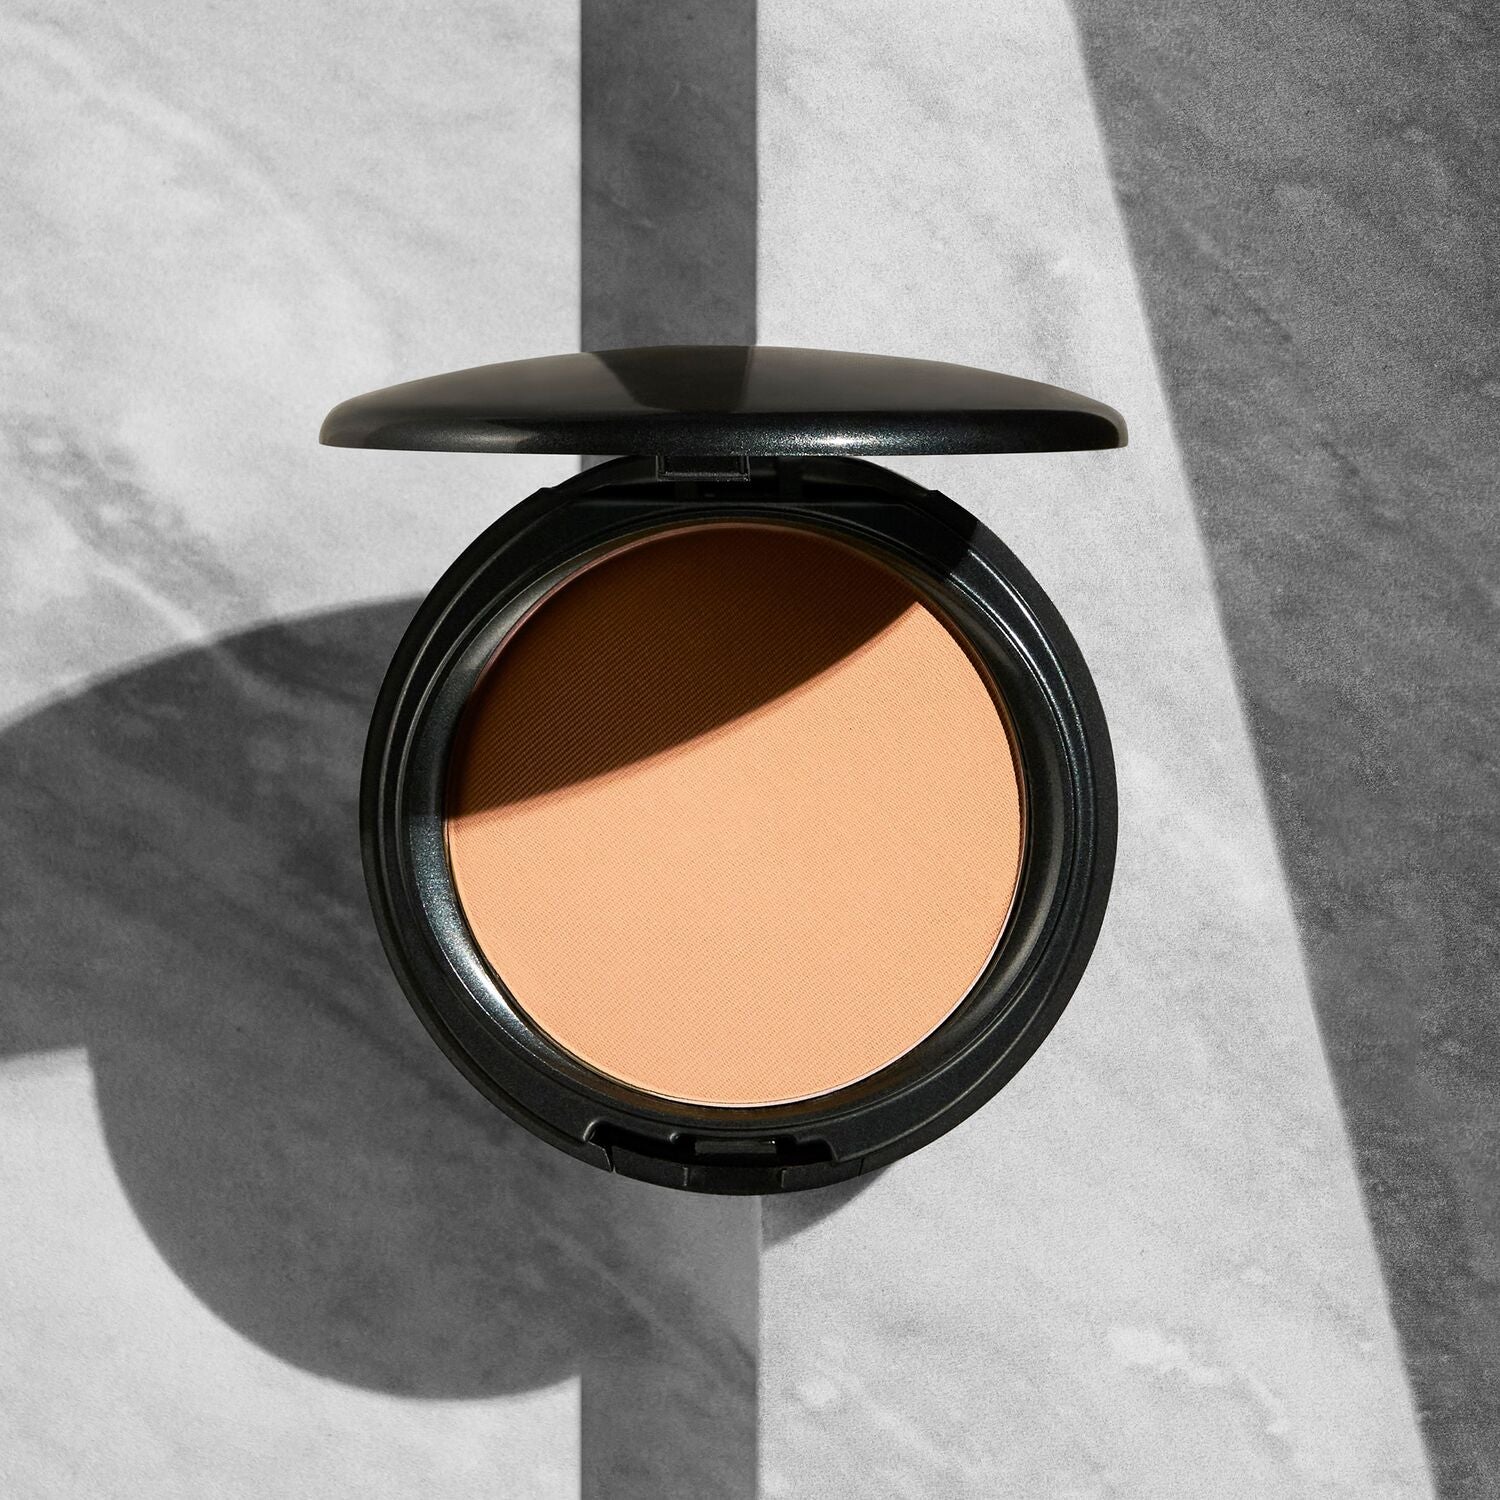 Coverfx Pressed Mineral Foundation in shade L1